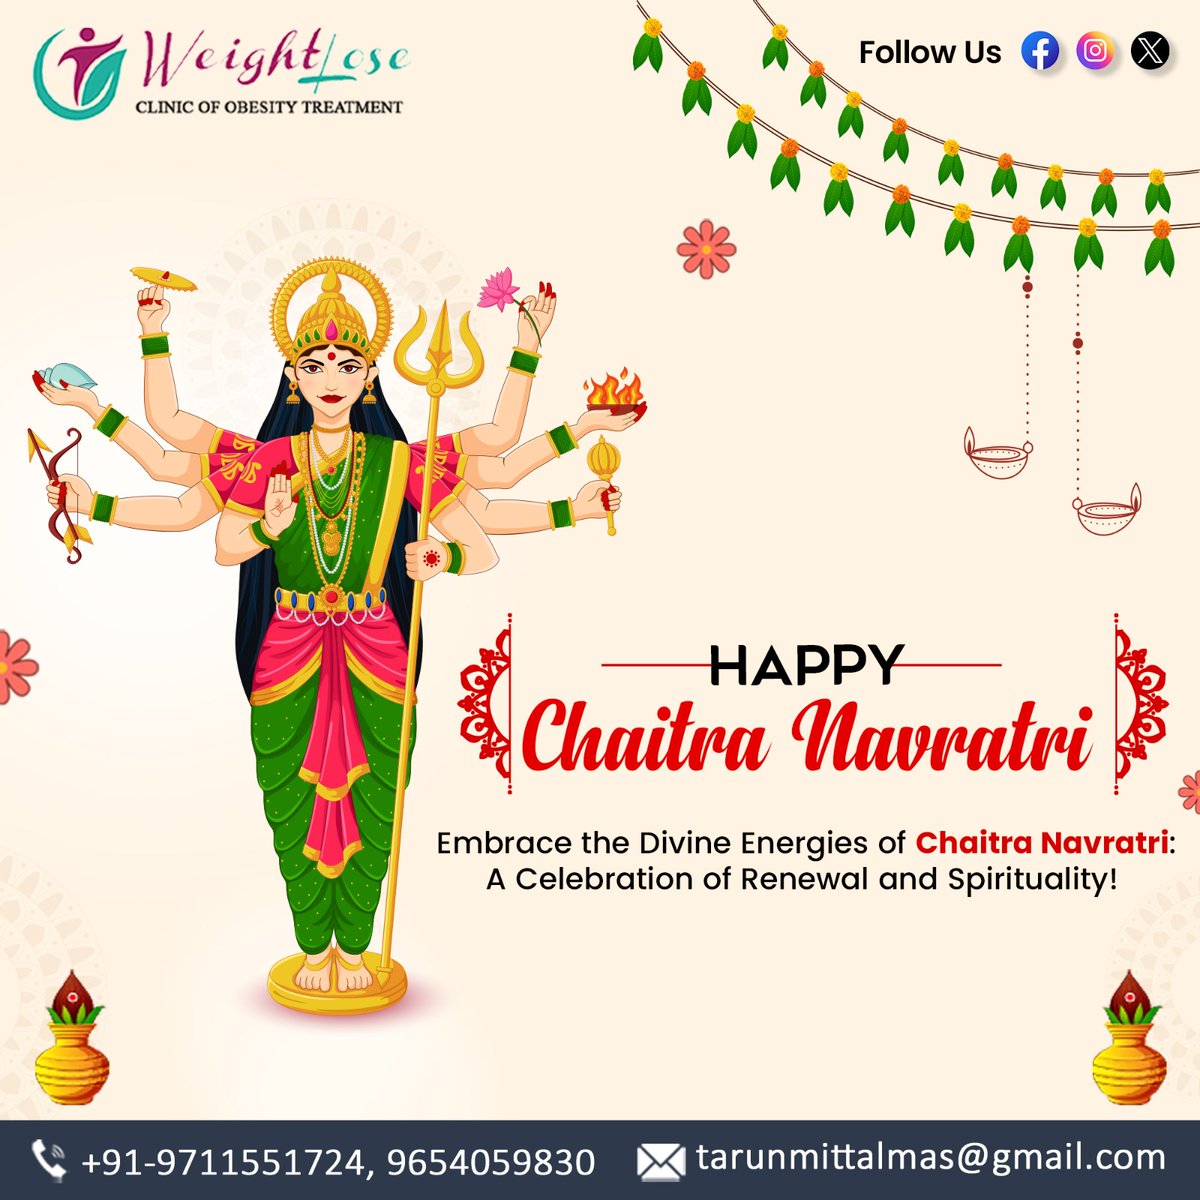 Join us in embracing the divine energies of Chaitra Navratri🌸🙏🏻! Let this auspicious occasion be a celebration of renewal and spirituality as we embark on a journey towards holistic well-being✨. May this Navratri inspire us to nourish our bodies, minds, and souls.